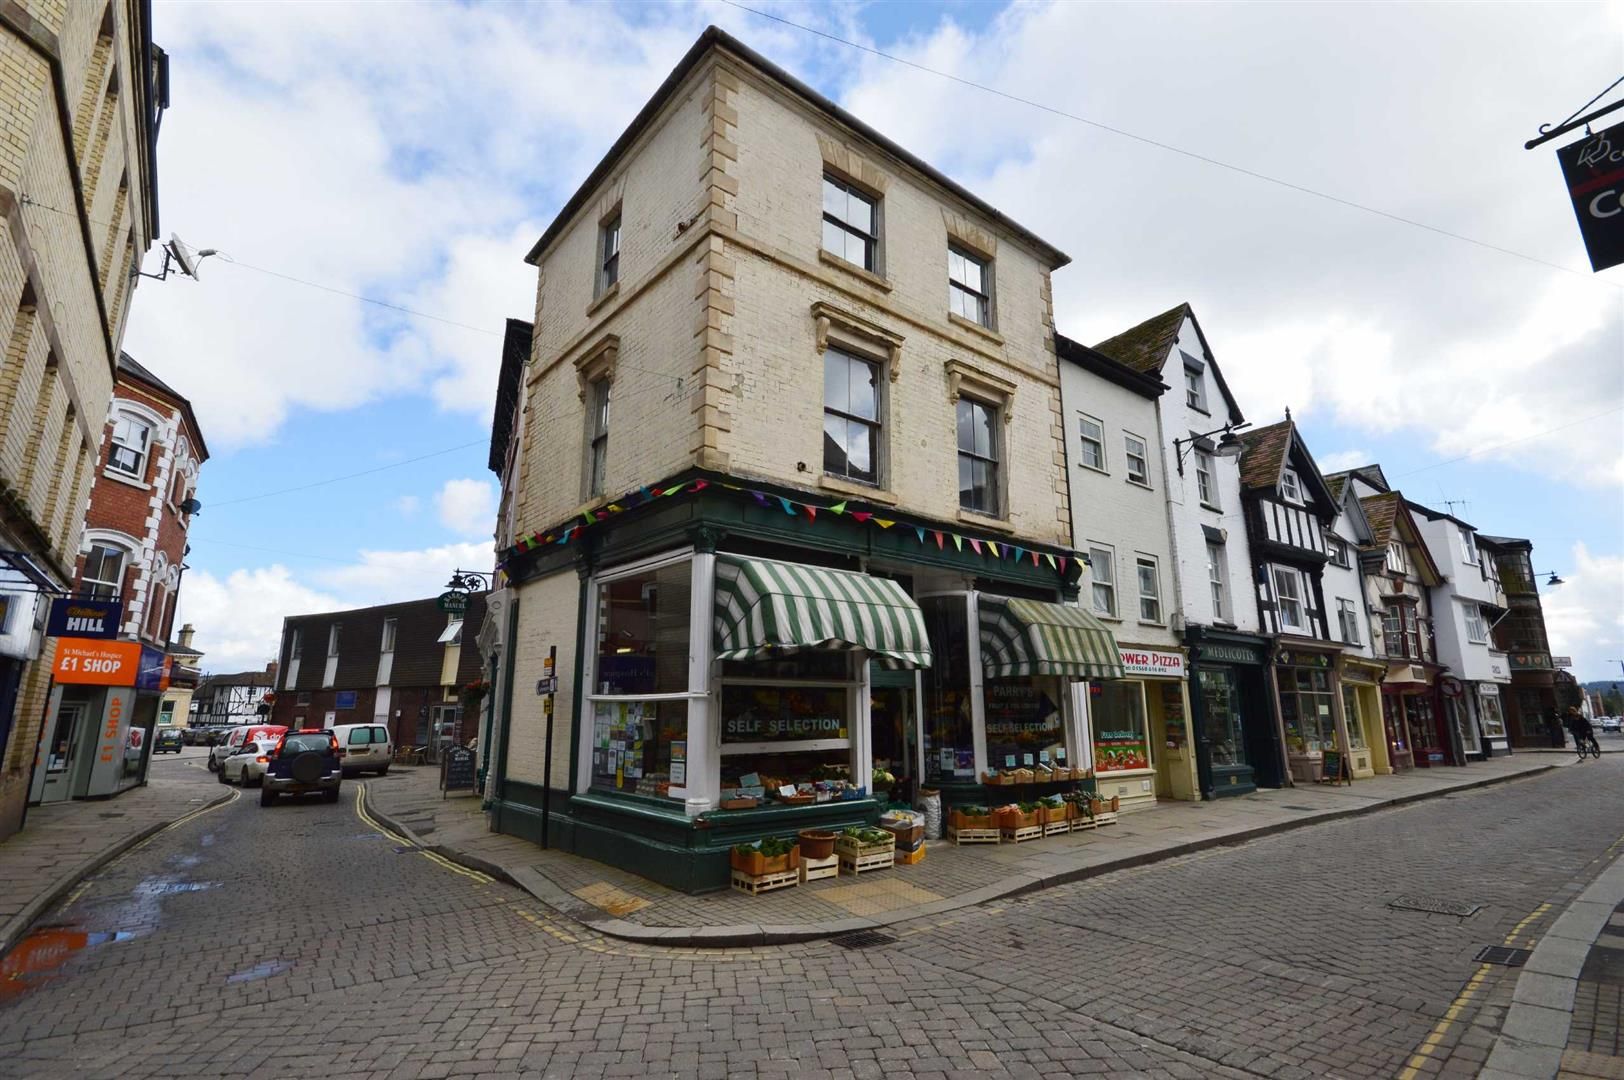 3 bed  for sale in Leominster - Property Image 1